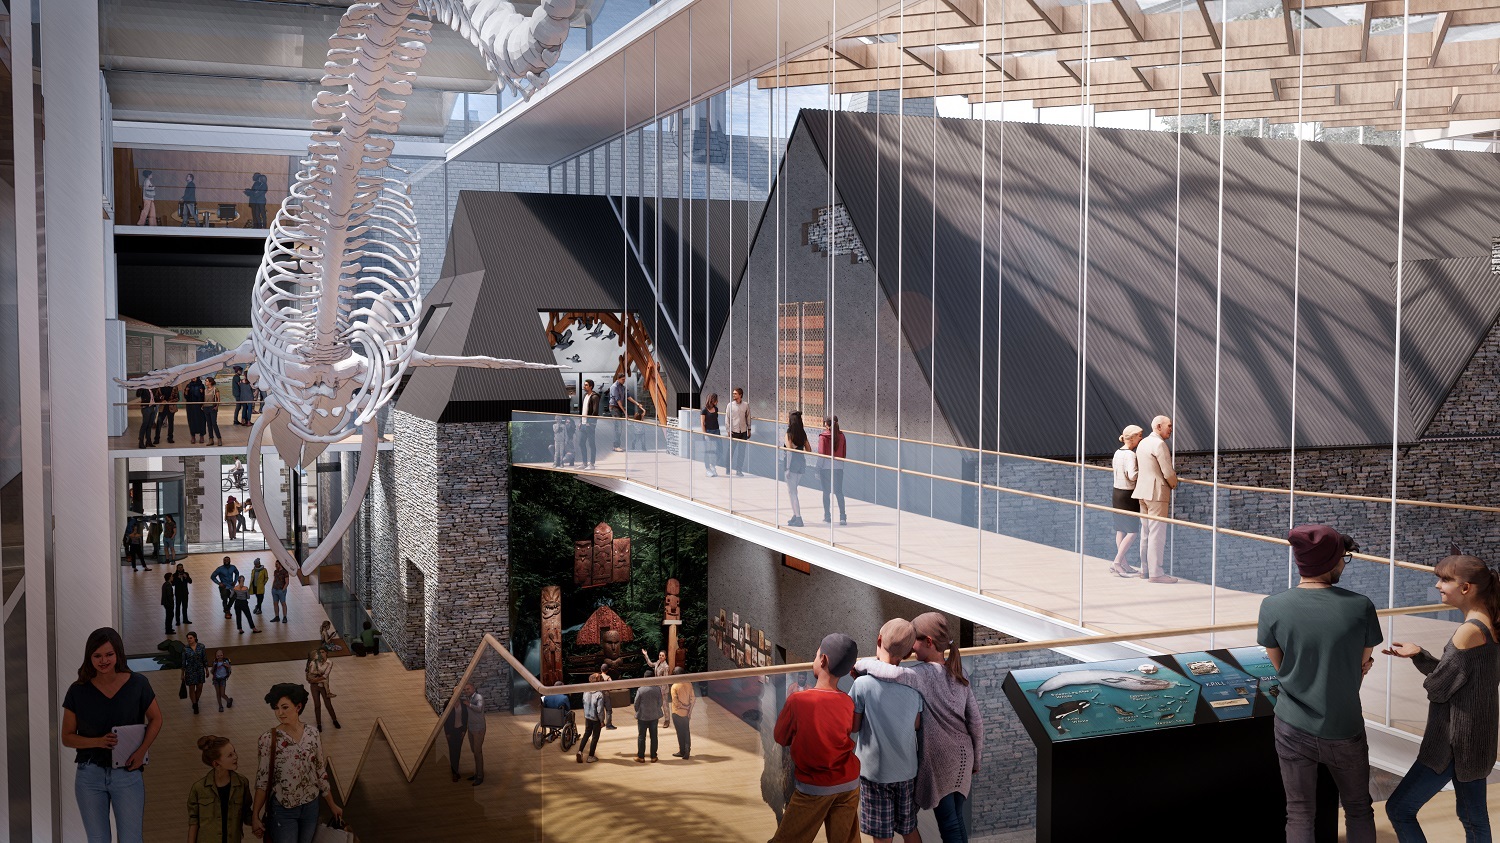 Concept designs for the Museum's proposed redevelopment show the blue whale skeleton on display in a new full-height atrium.